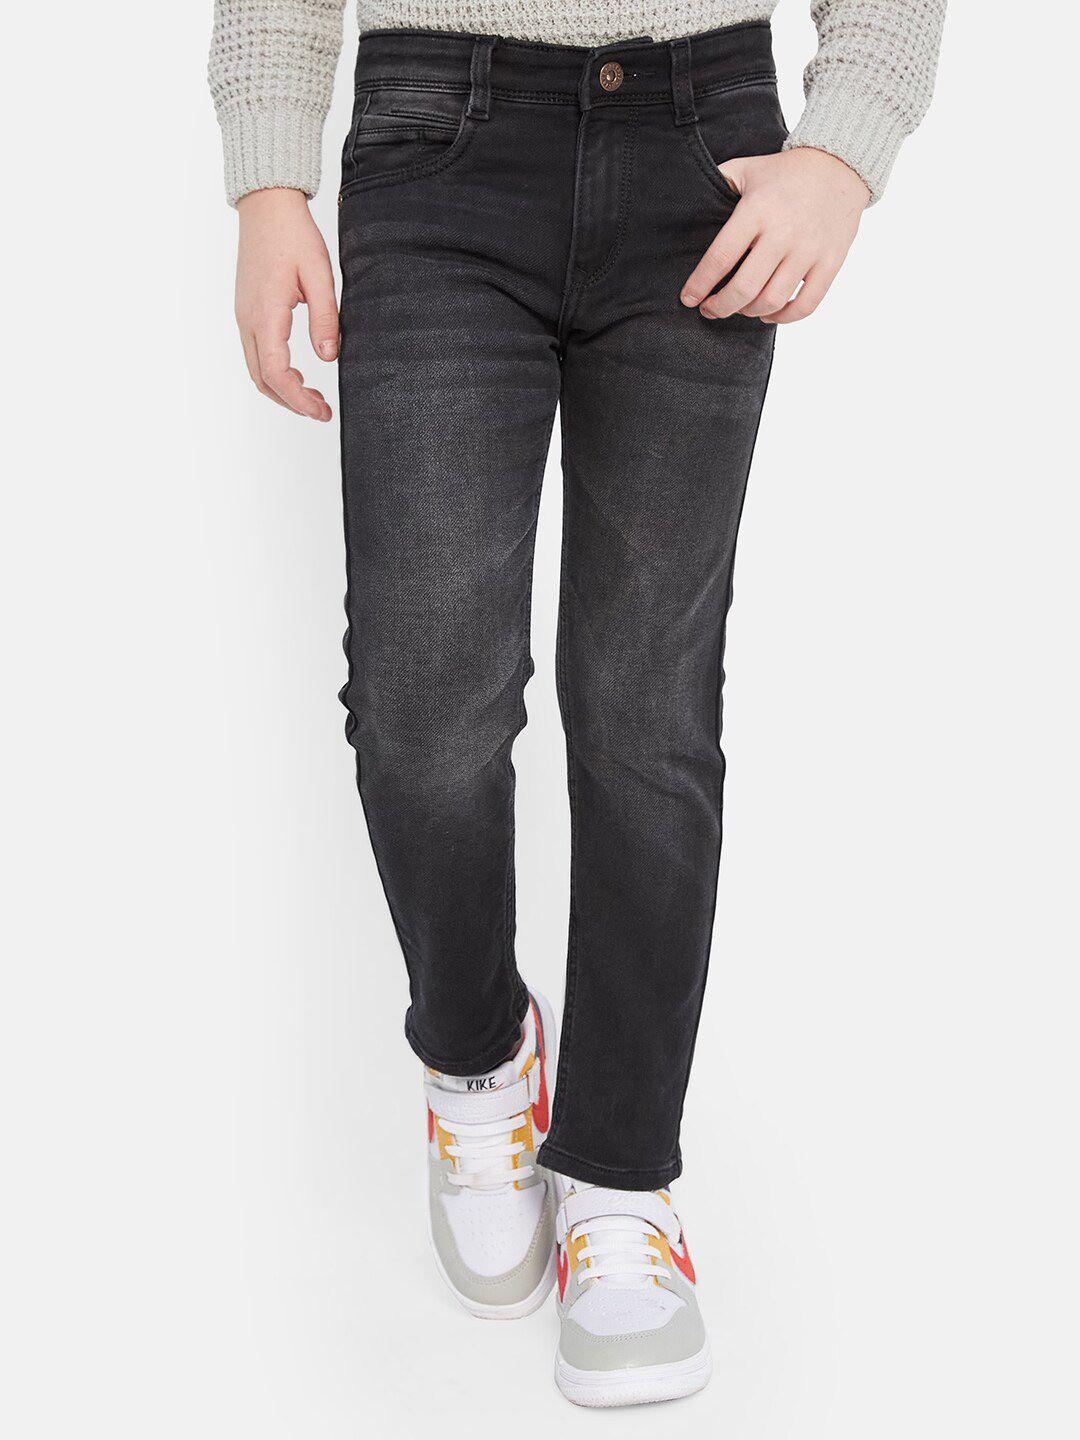 octave boys mid-rise light fade stretchable jeans